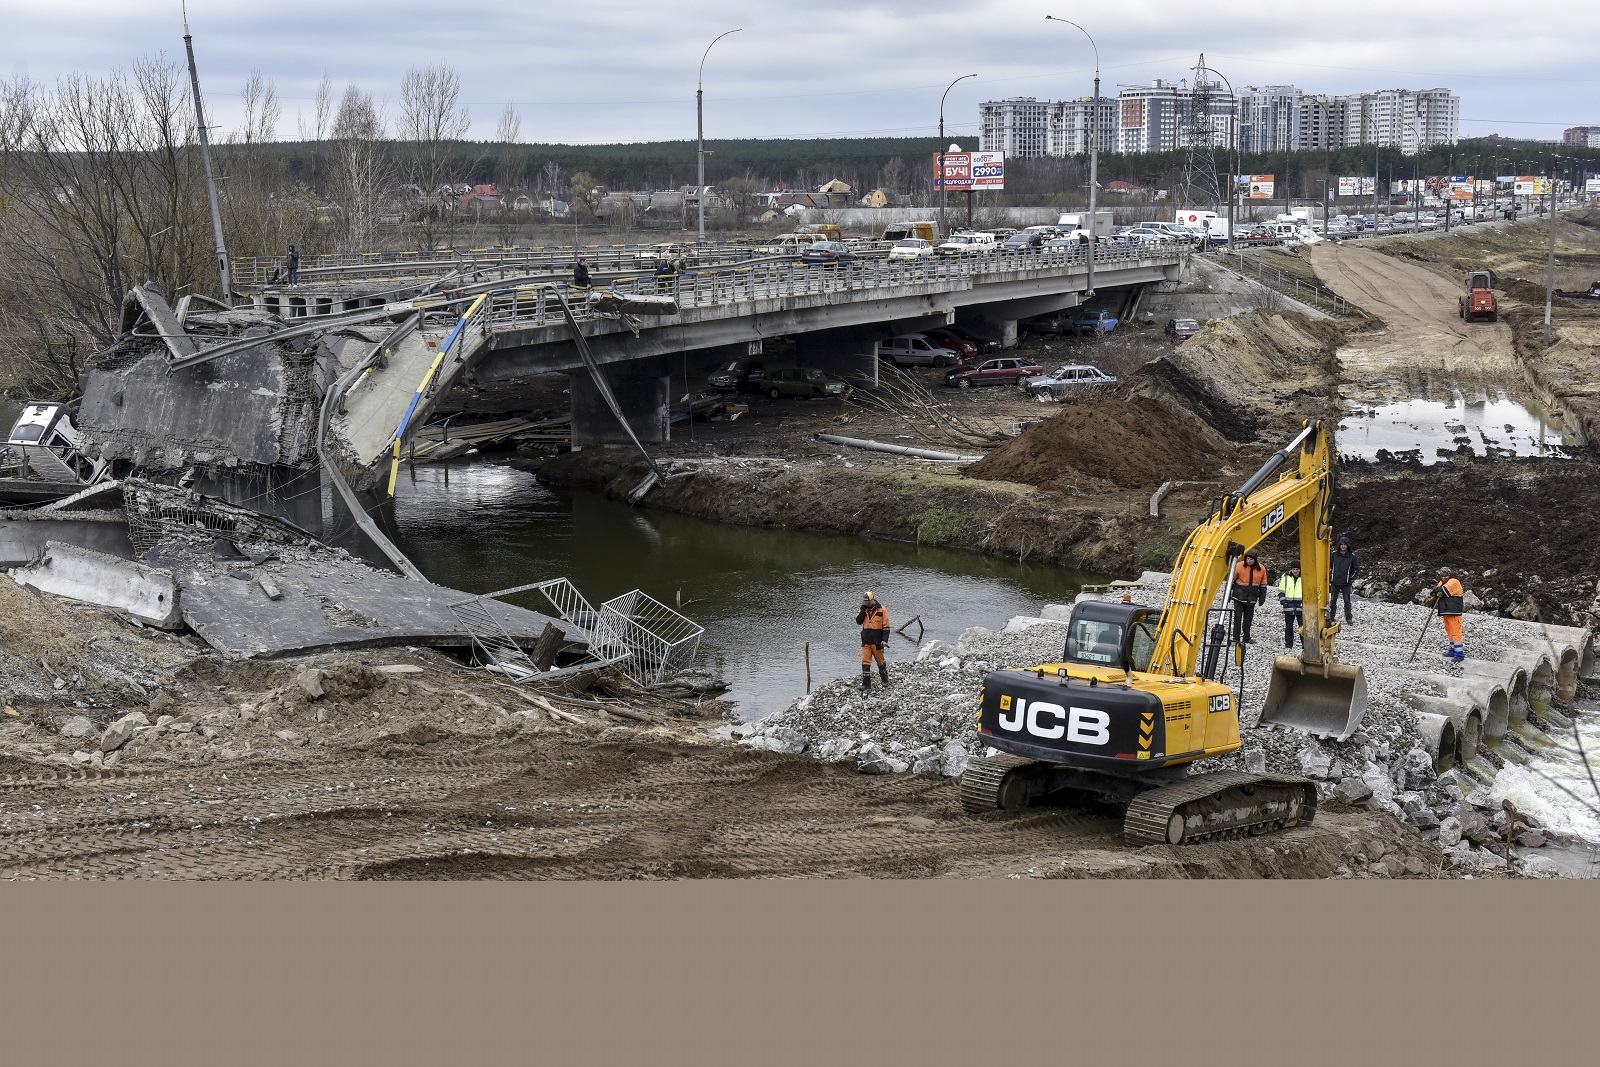 epa09873518 Ukrainians build a new bridge (R) over a river near the damaged old bridge (L) outside the recaptured city of Irpin, Ukraine, 06 April 2022. Ukrainian forces have recently recaptured from the Russian army some cities and villages in the outskirts of Kyiv.  EPA/OLEG PETRASYUK